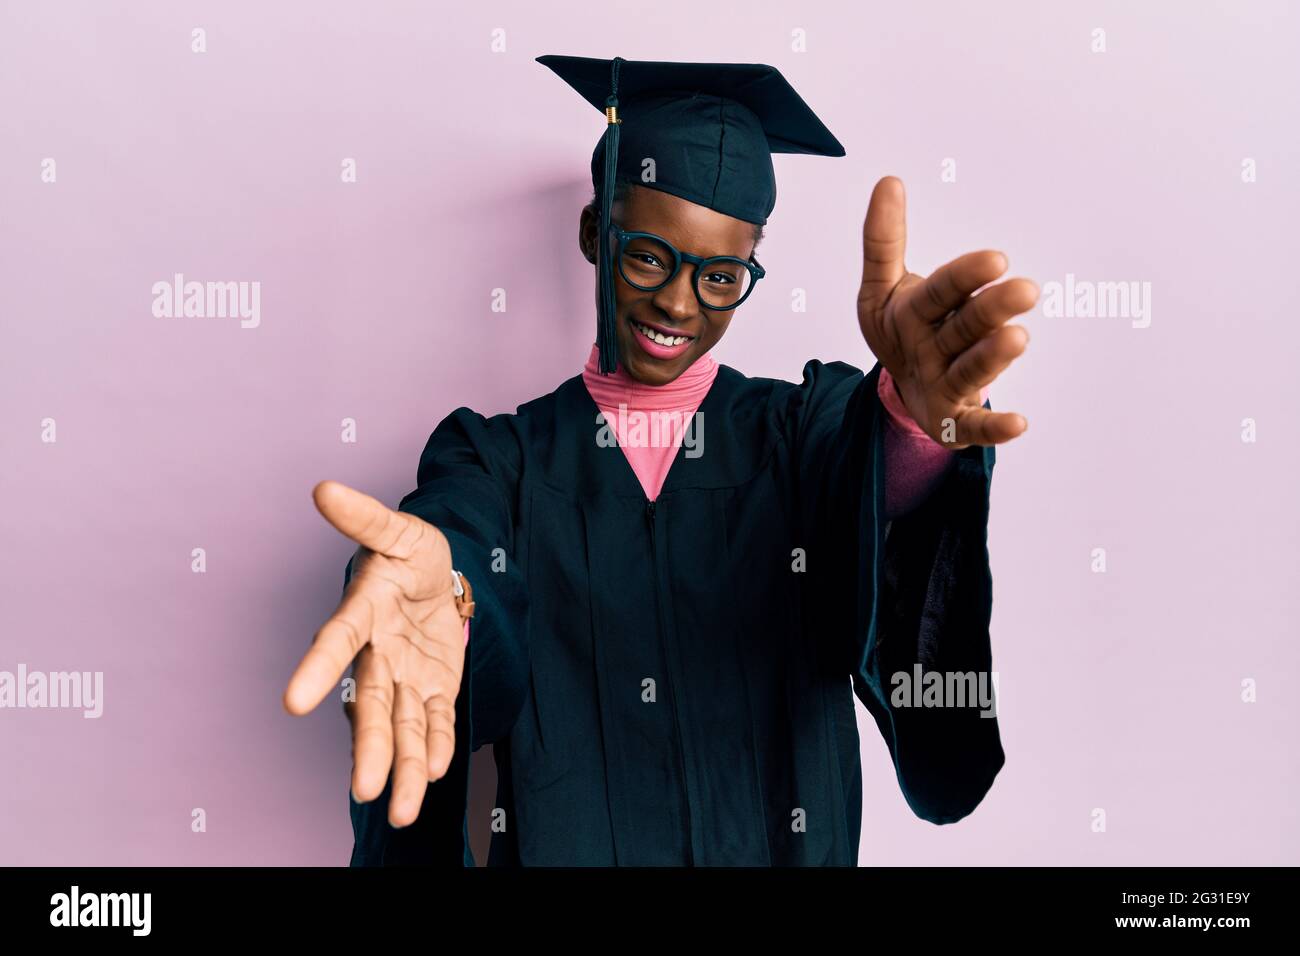 Young african american girl wearing graduation cap and ceremony robe looking at the camera smiling with open arms for hug. cheerful expression embraci Stock Photo